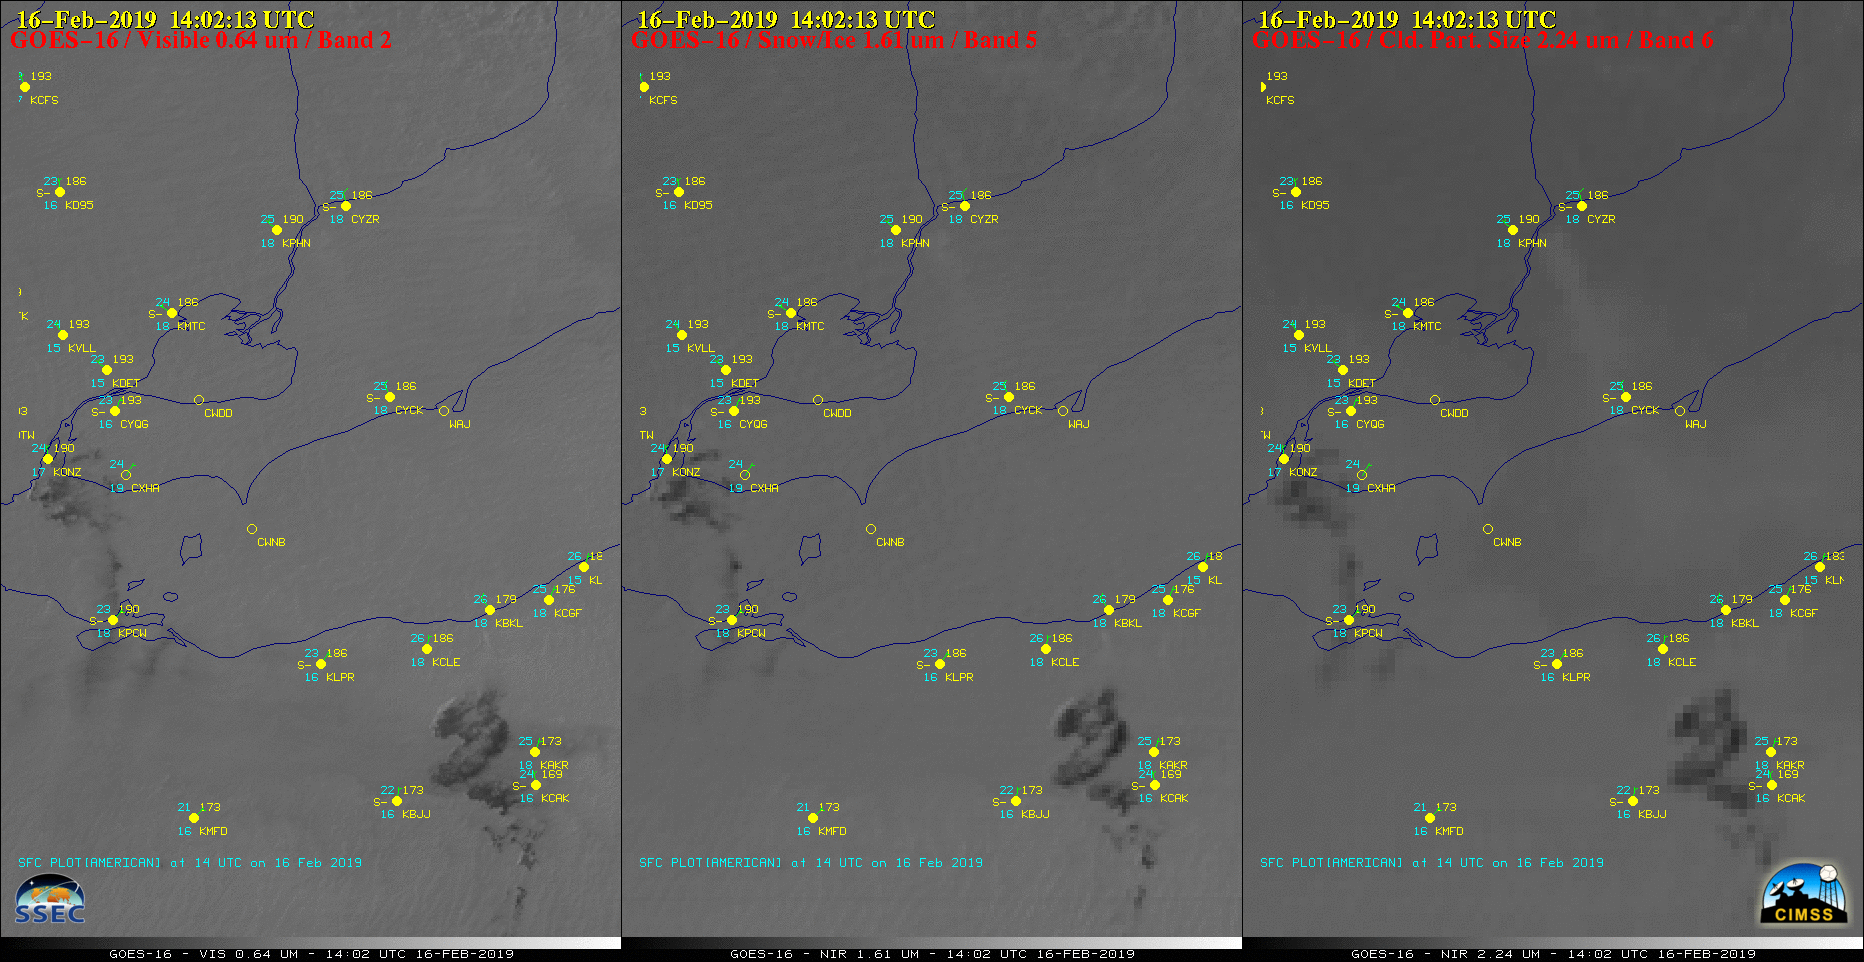 GOES-16 "Red" Visible (0.64 µm, left), Near-Infrared "Snow/Ice" (1.61 µm, center) and Near-Infrared "Cloud Particle Size" (2.24 µm, right) images [click to play animation | MP4]